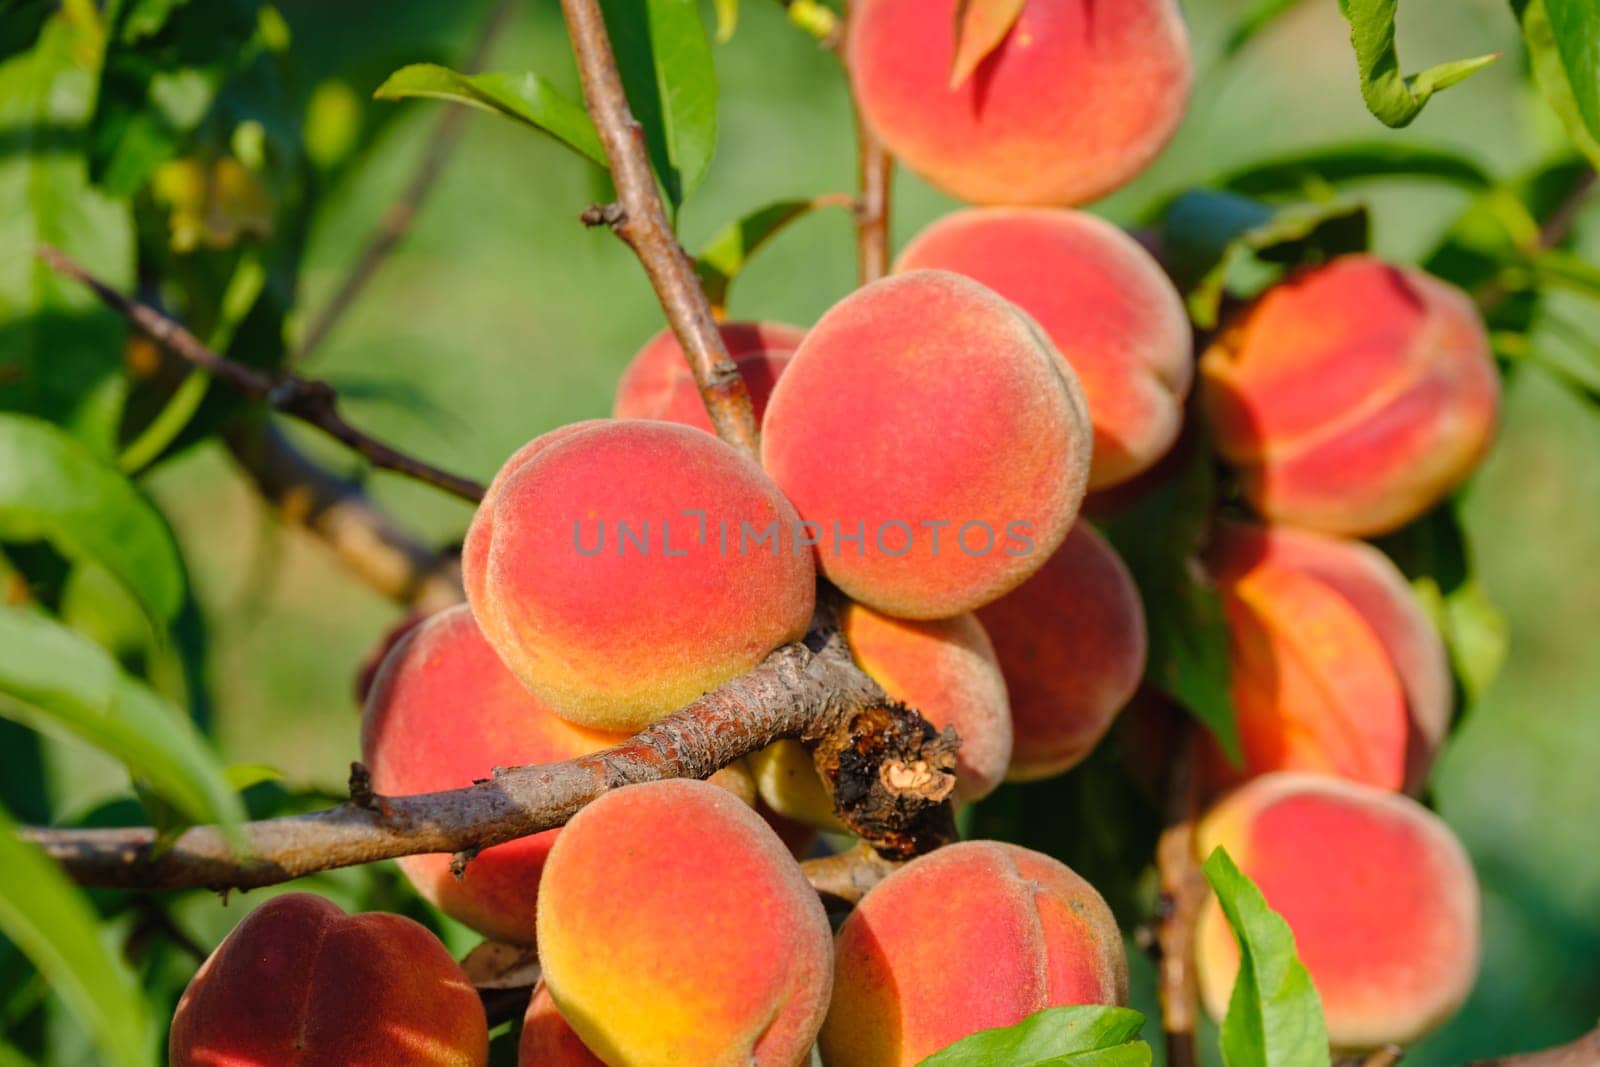 Peaches growing on a tree. Fresh peach tree download by igor010